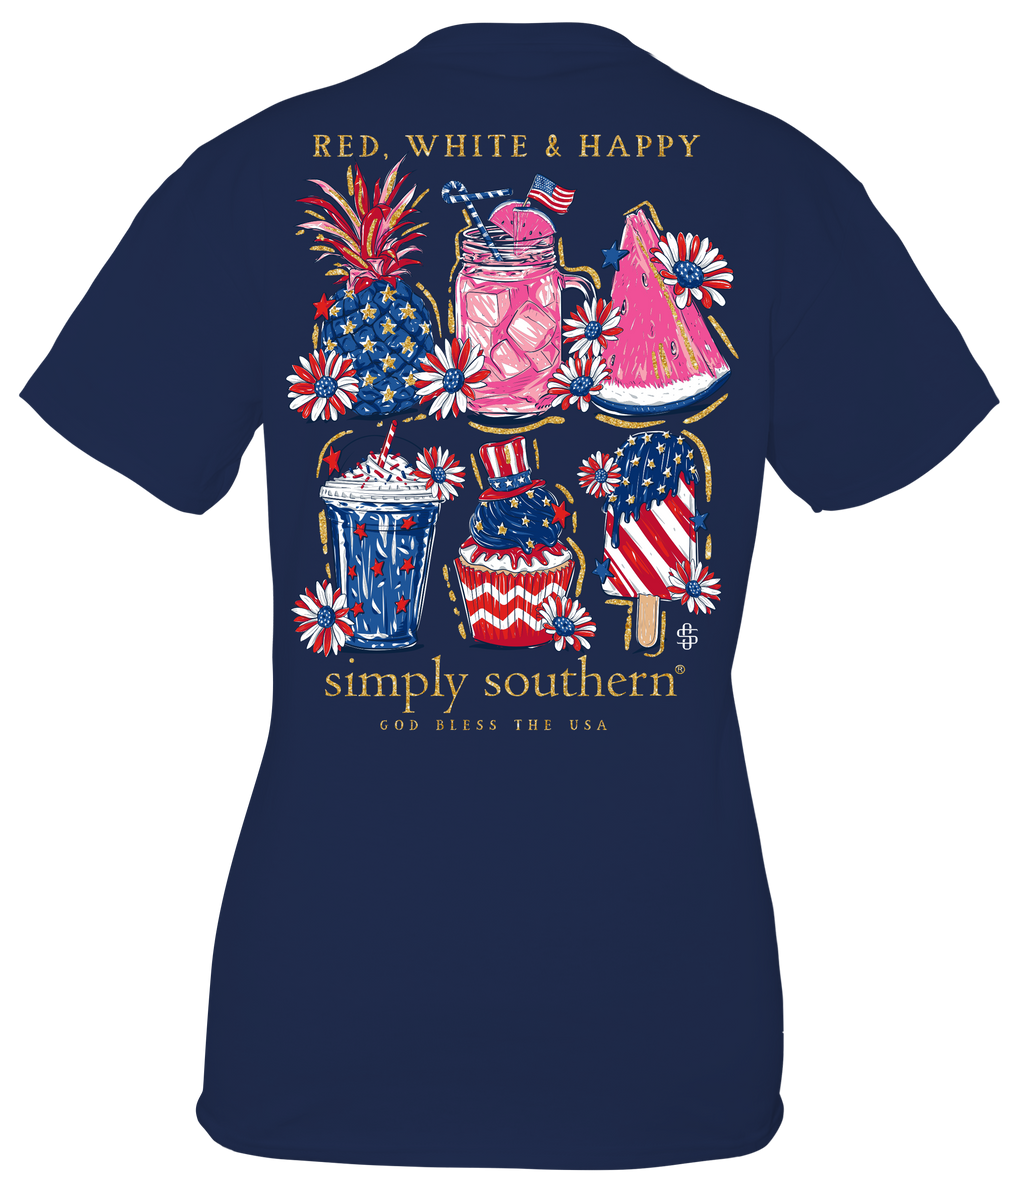 Simply Southern, Short Sleeve Tee - RED, WHITE & HAPPY (USA) - Monogram Market